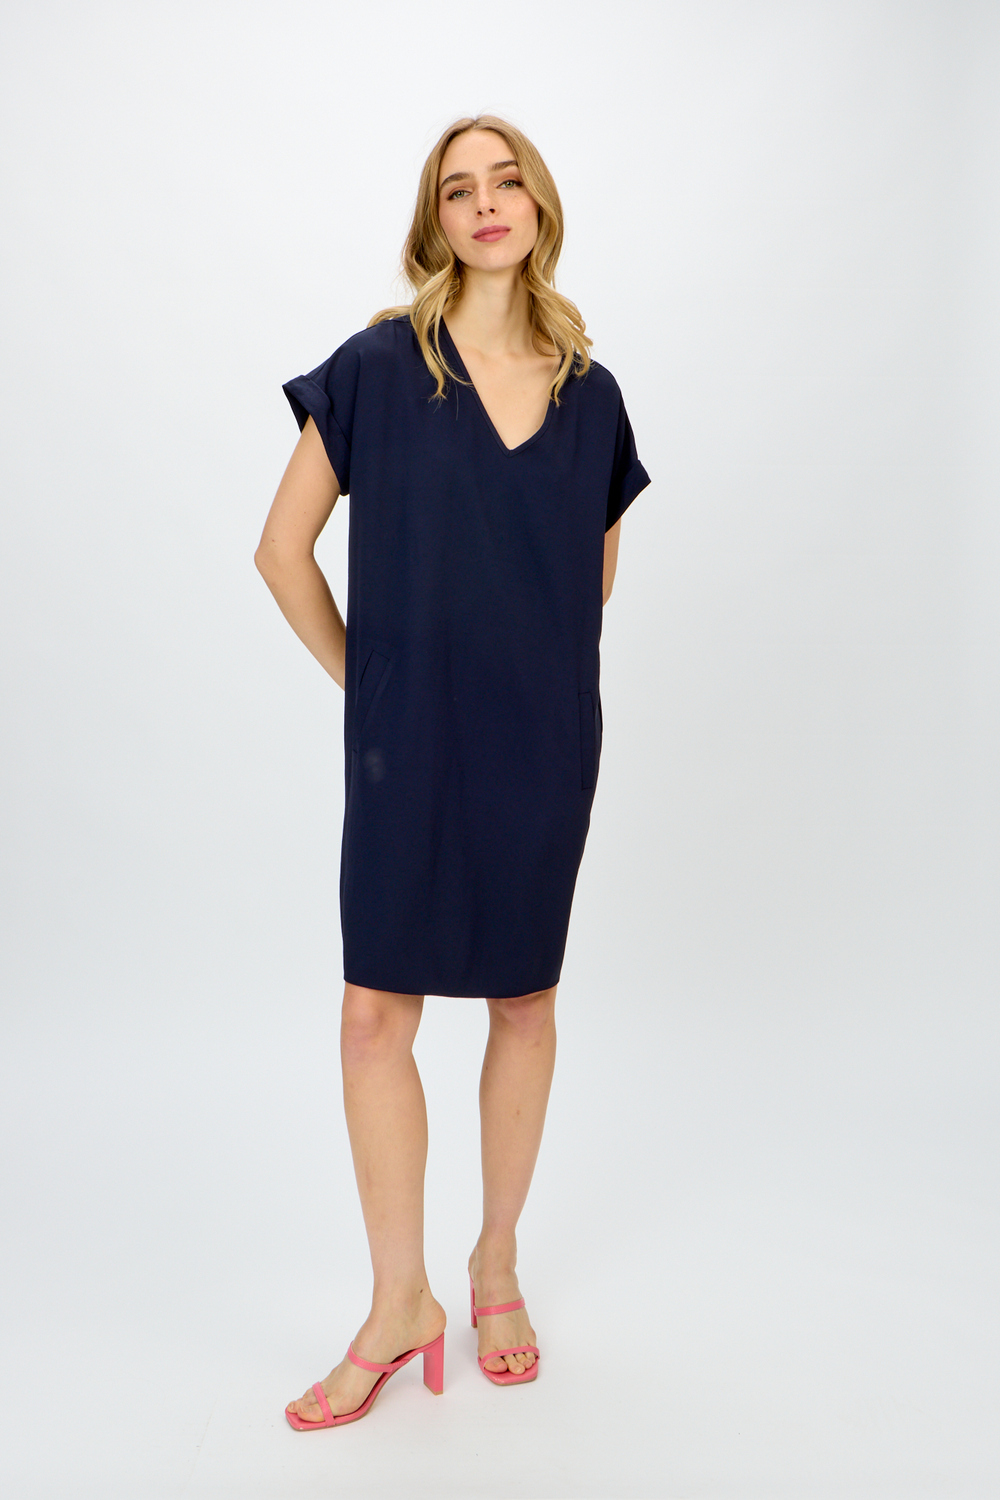 T-Shirt Dress with Pockets Style 241129. Midnight Blue